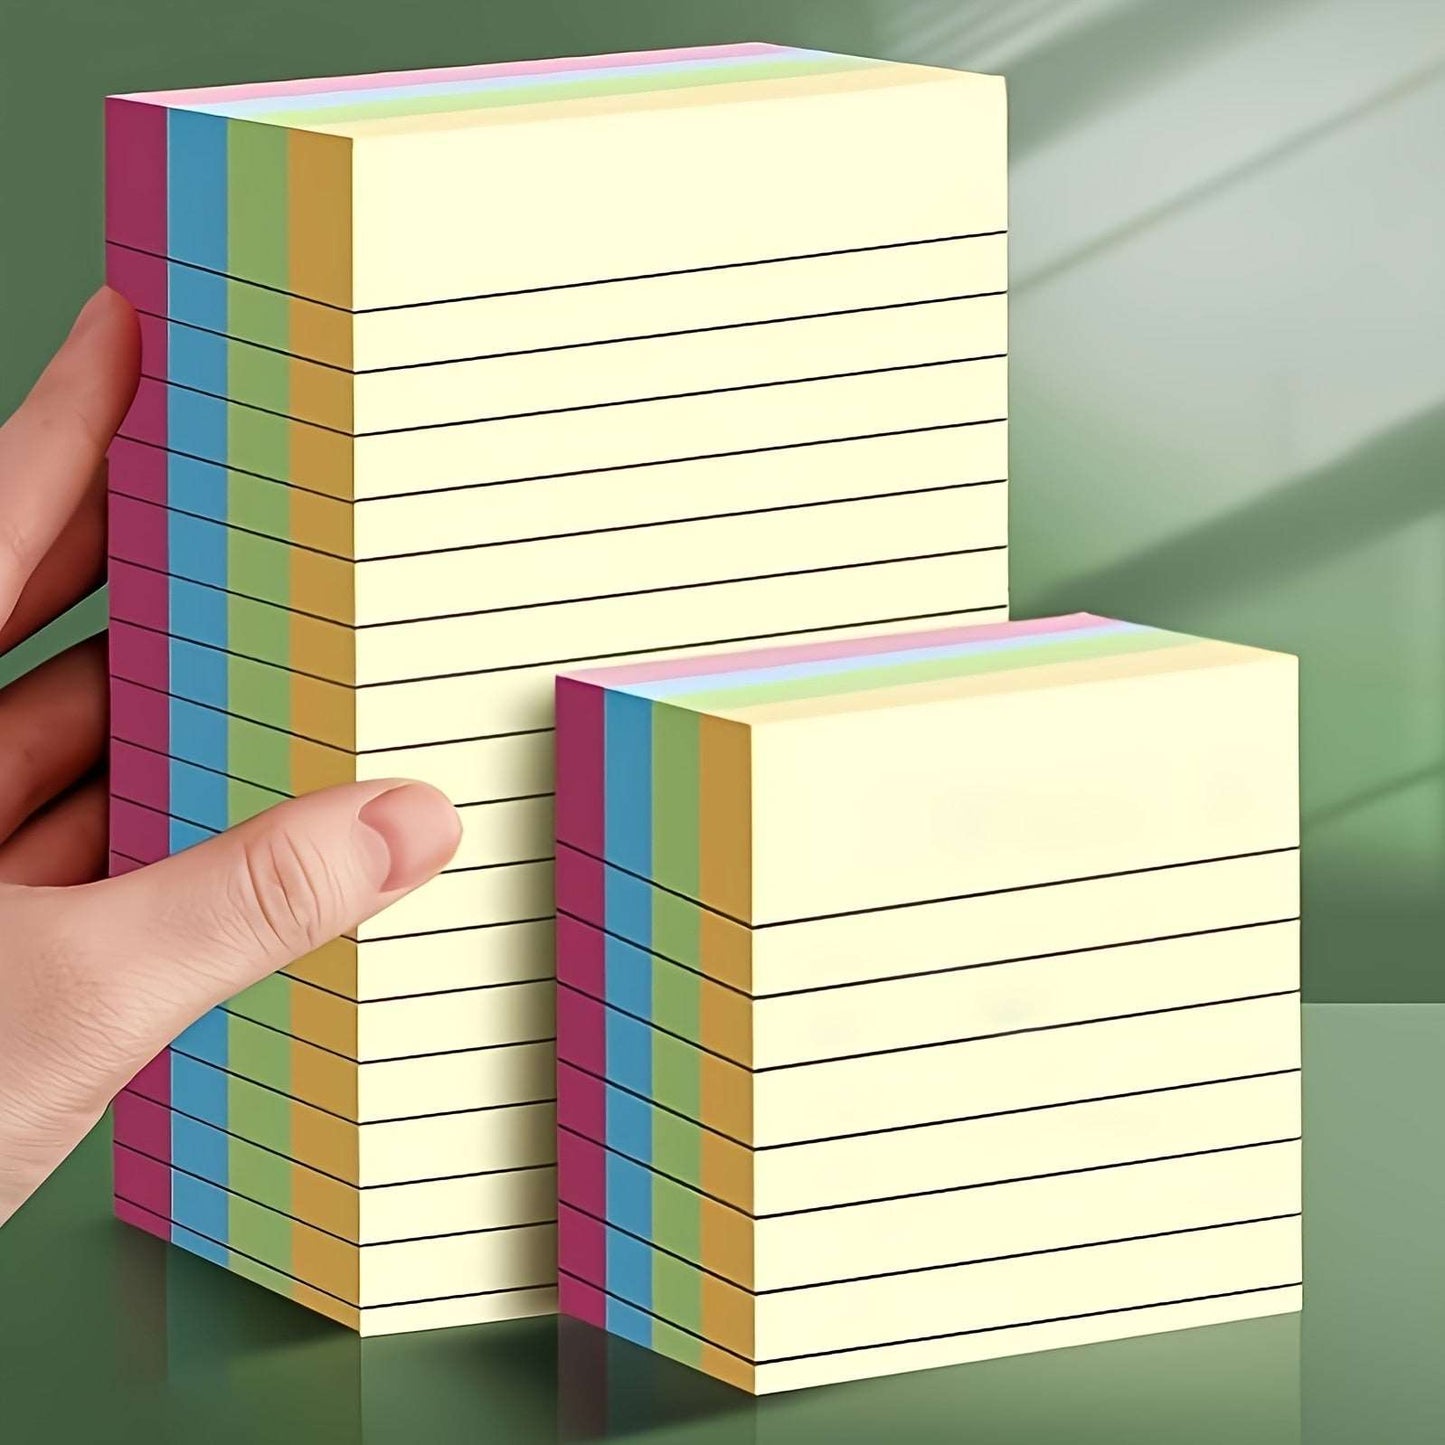 200 Sheets Lined Sticky Notes 4 Colors Memo Pad Office School Student at acheckbox